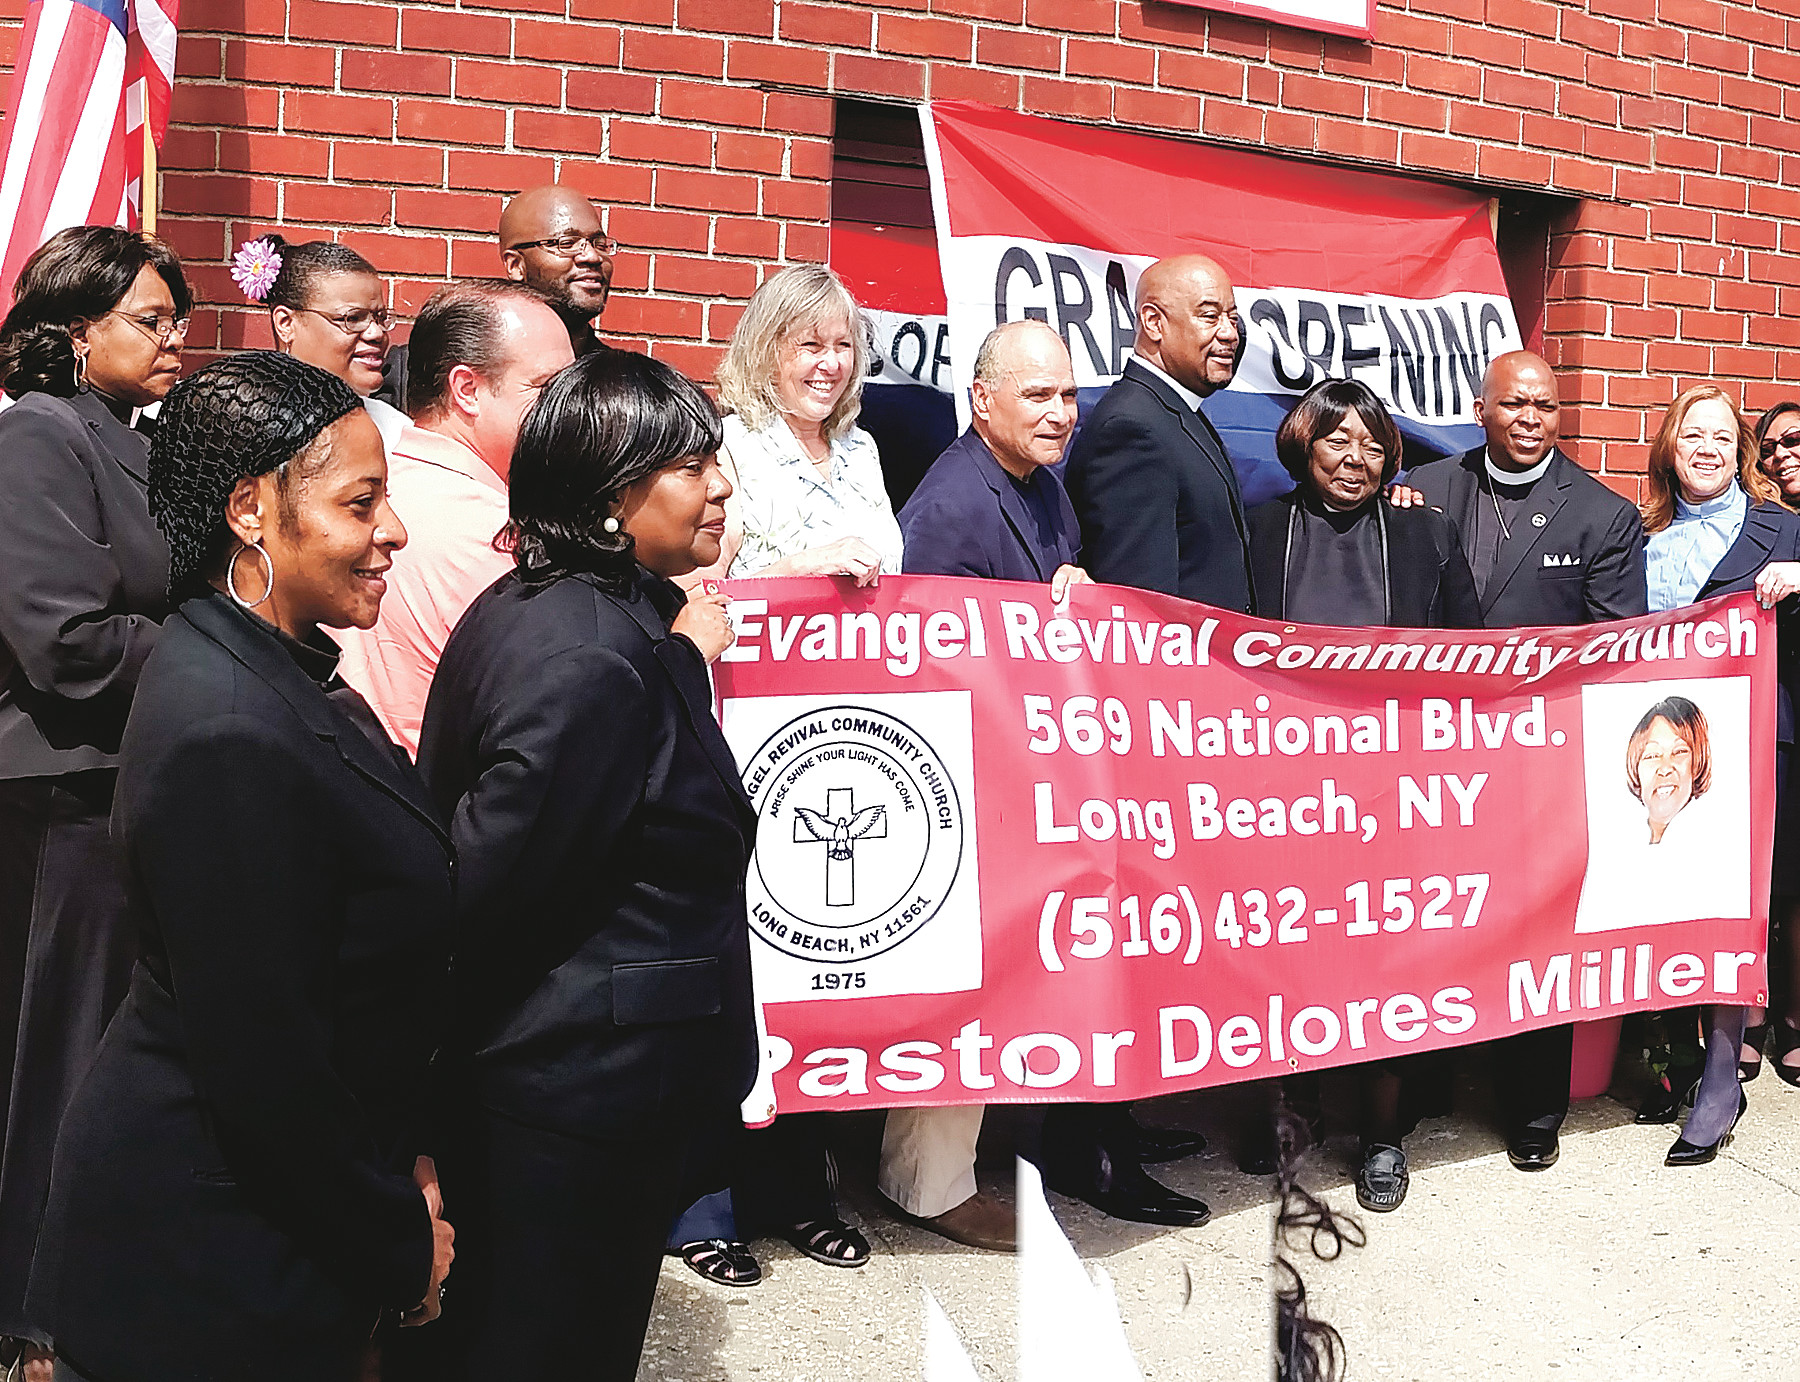 Courtesy Ronnie Myles
Rev. Delores Miller, third from right, was joined by local officials, clergy and residents at the reopening of the newly renovated Evangel Revival Community Church on May 30, more than two and a half years after Hurricane Sandy damaged the building.